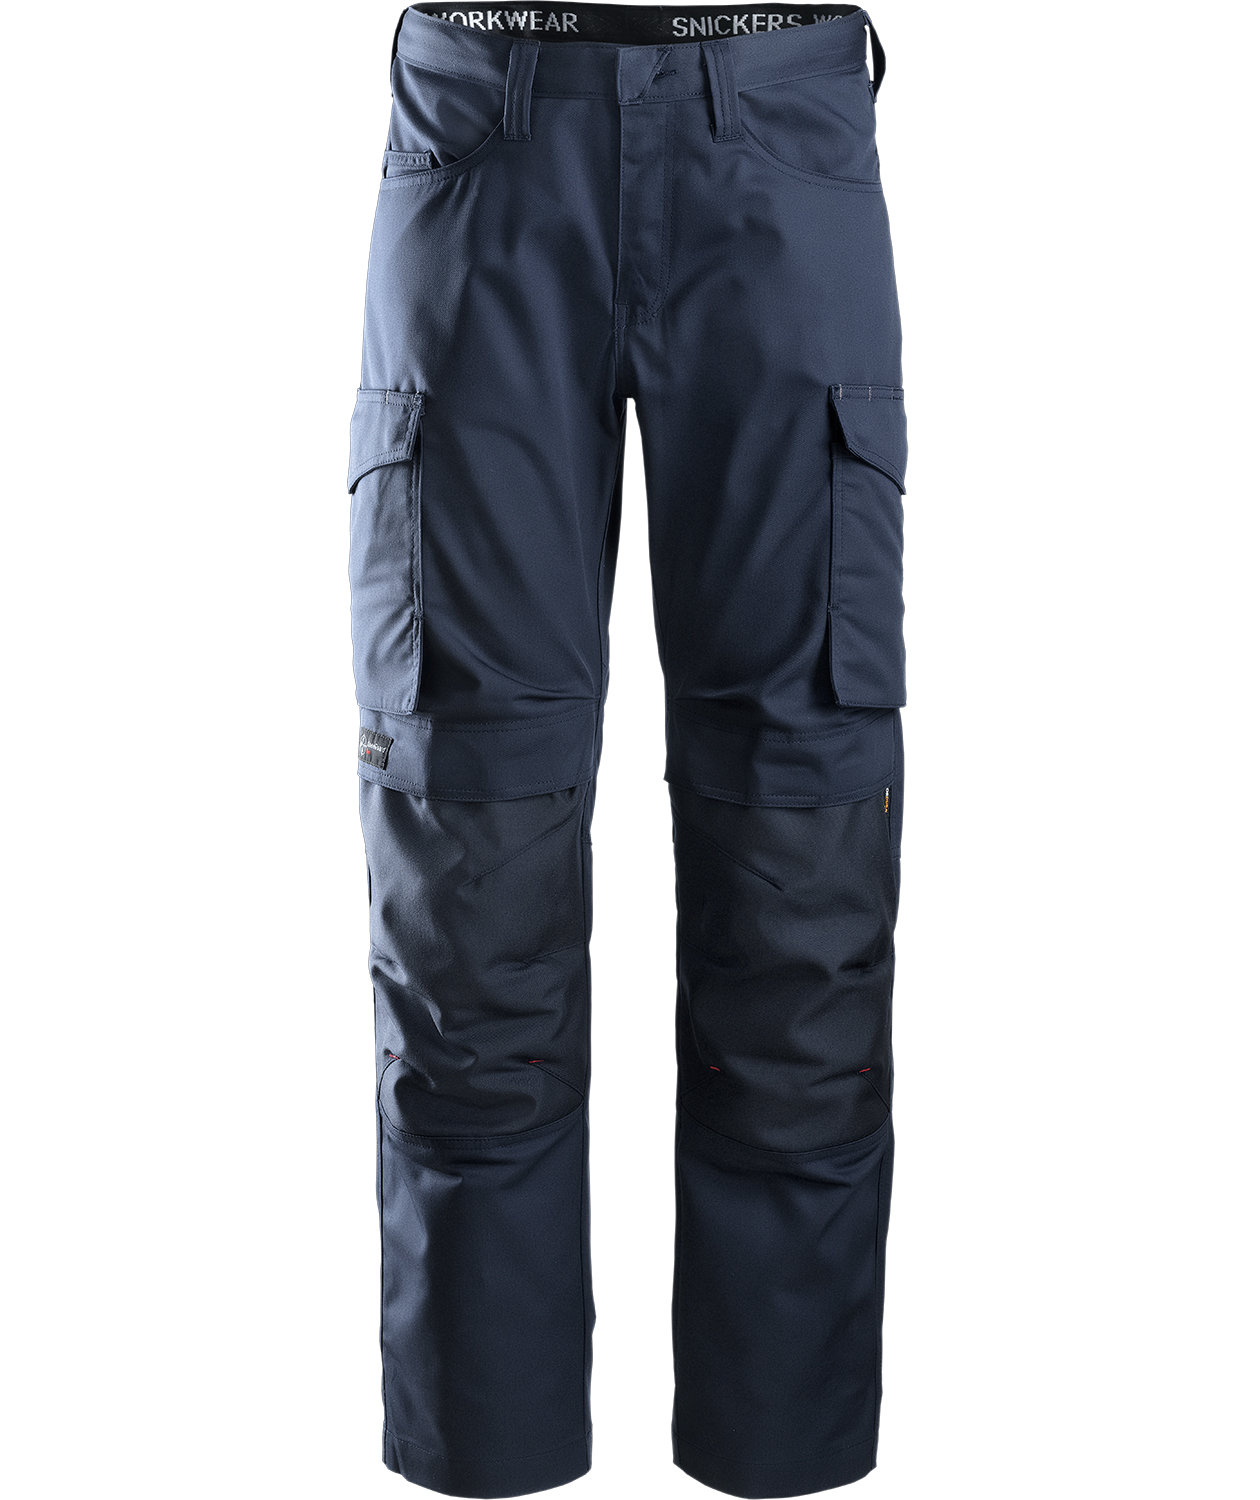 Cheap Snickers Mens Cooltwill Workwear Trousers / Pants | Joom